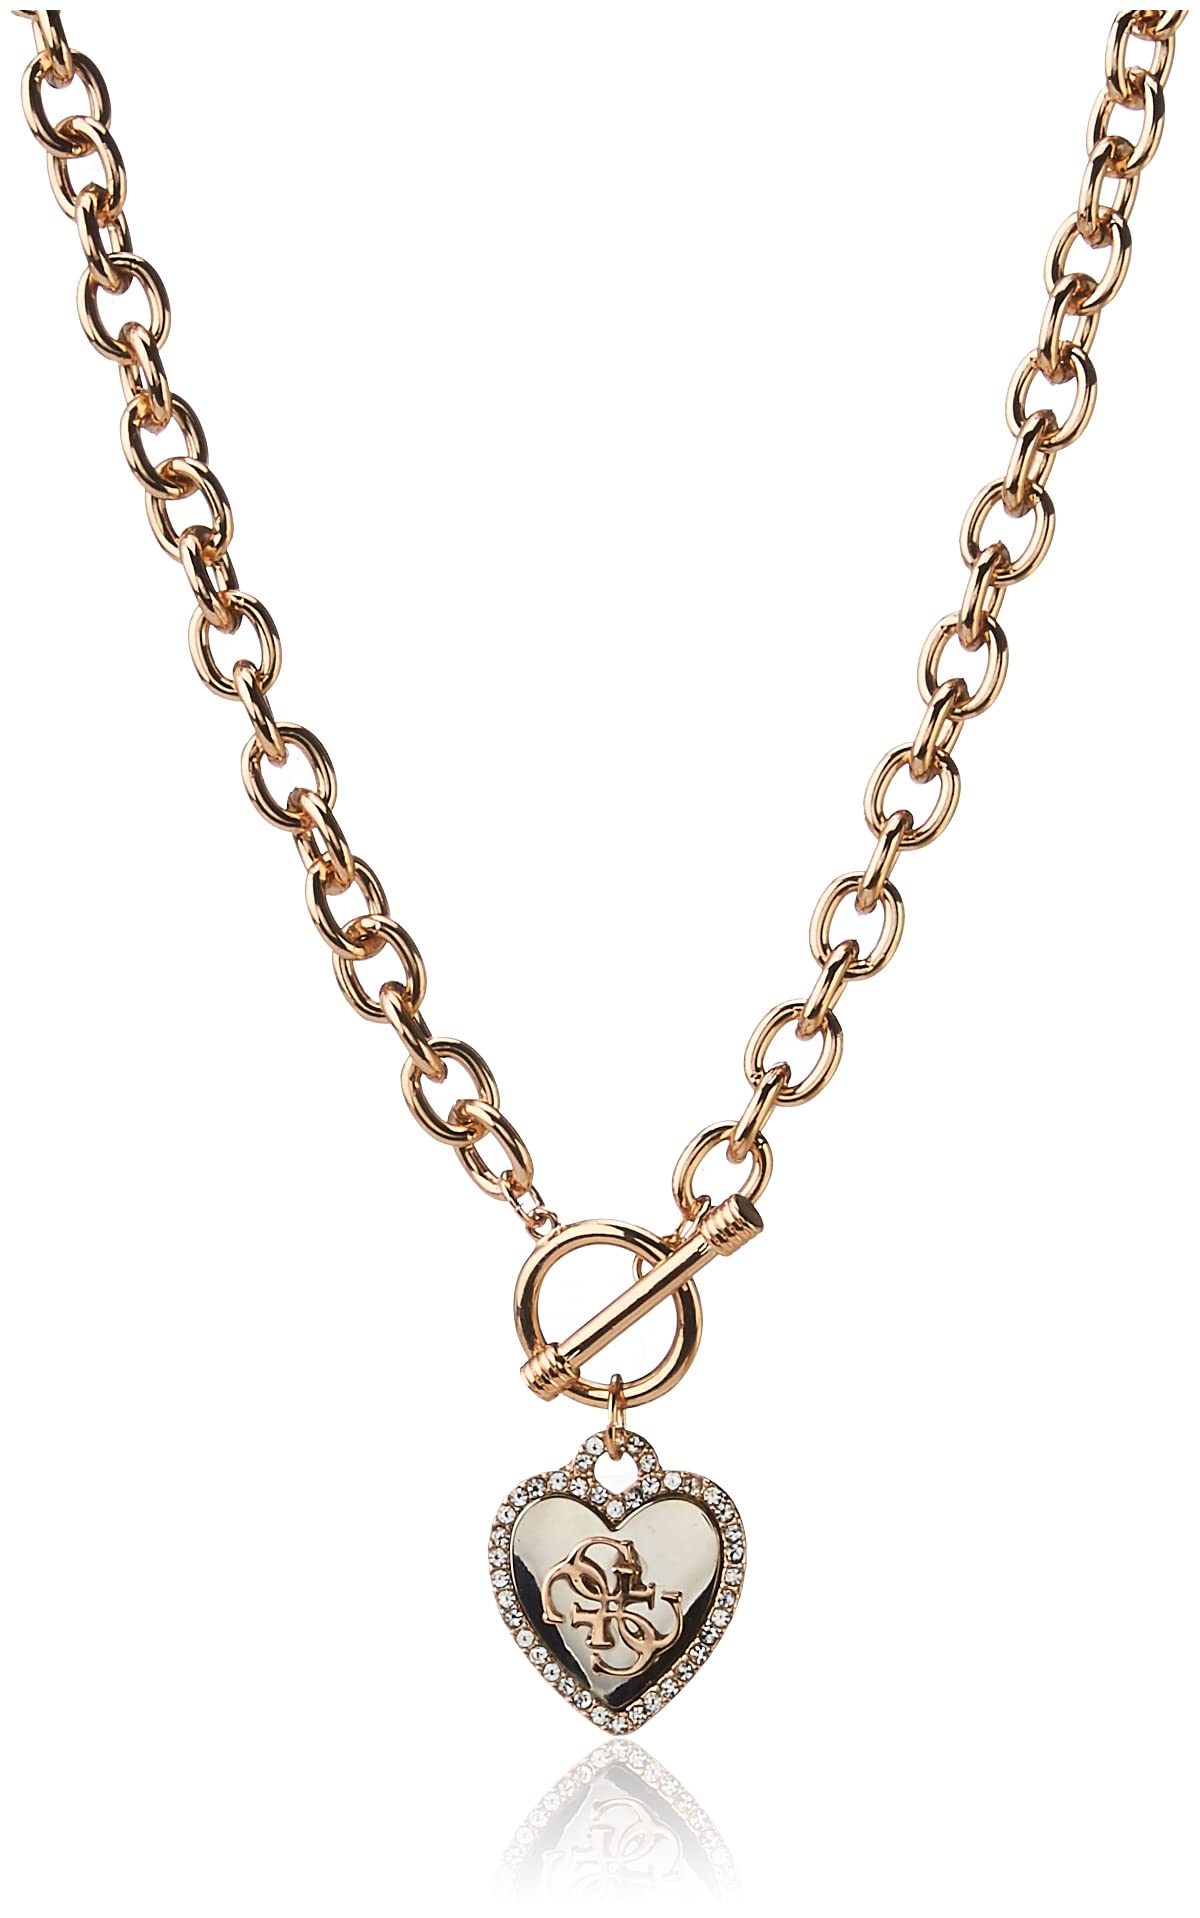 GUESS Womens Pave Framed Heart Toggle Necklace with 4 G Logo Silver/Gold/Crystal One Size